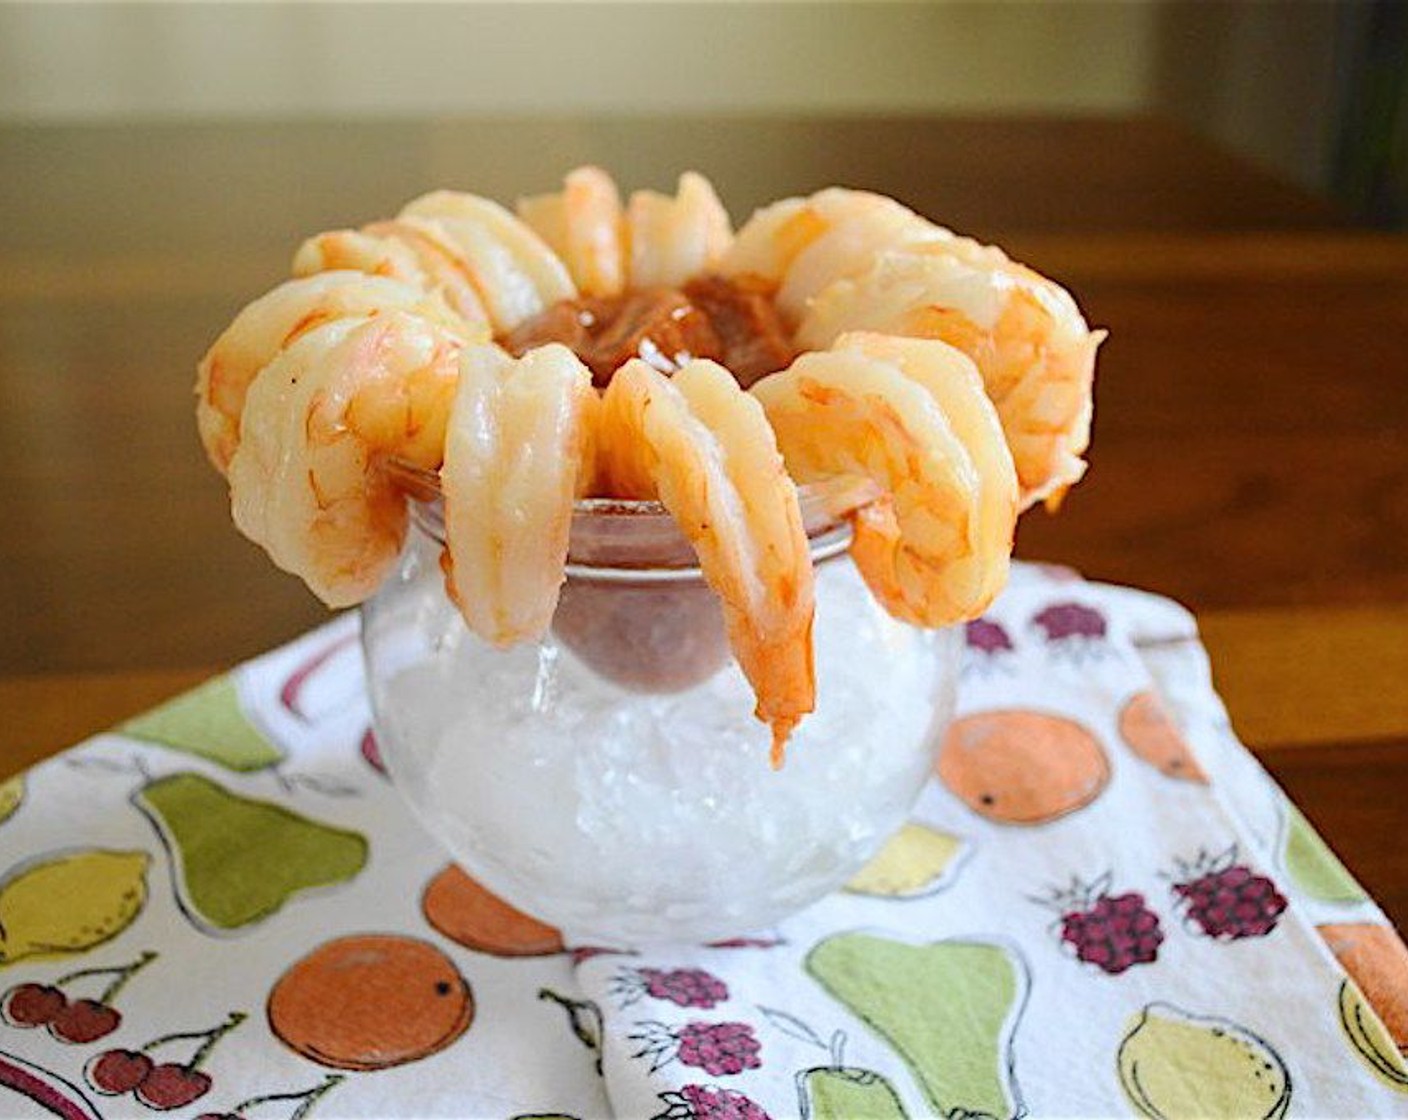 step 5 When the shrimp is done, serve it on a pretty platter or in martini glasses with the sauce! Enjoy!